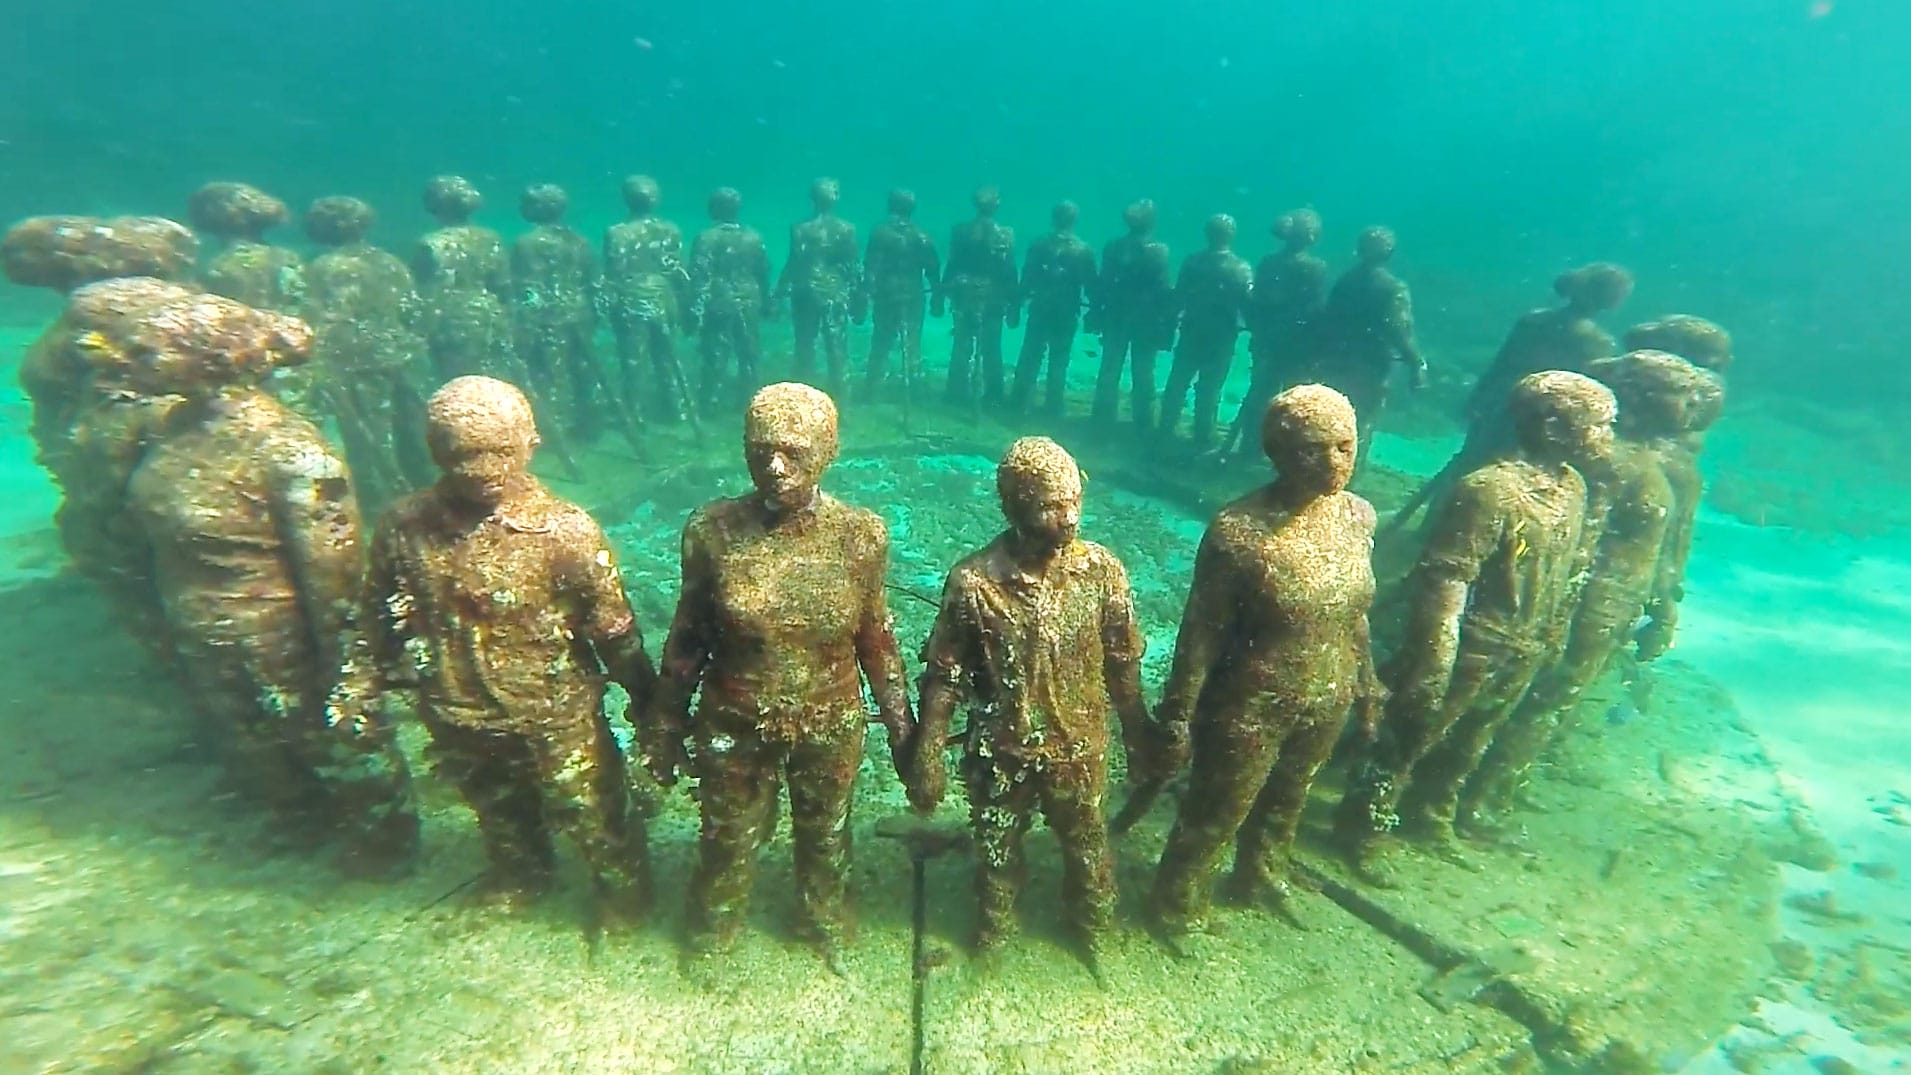 The Molinere Underwater Sculpture Park, Grenada, was designed by British sculptor Jason deCaires Taylor and is thought to be a tribute to enslaved Black people